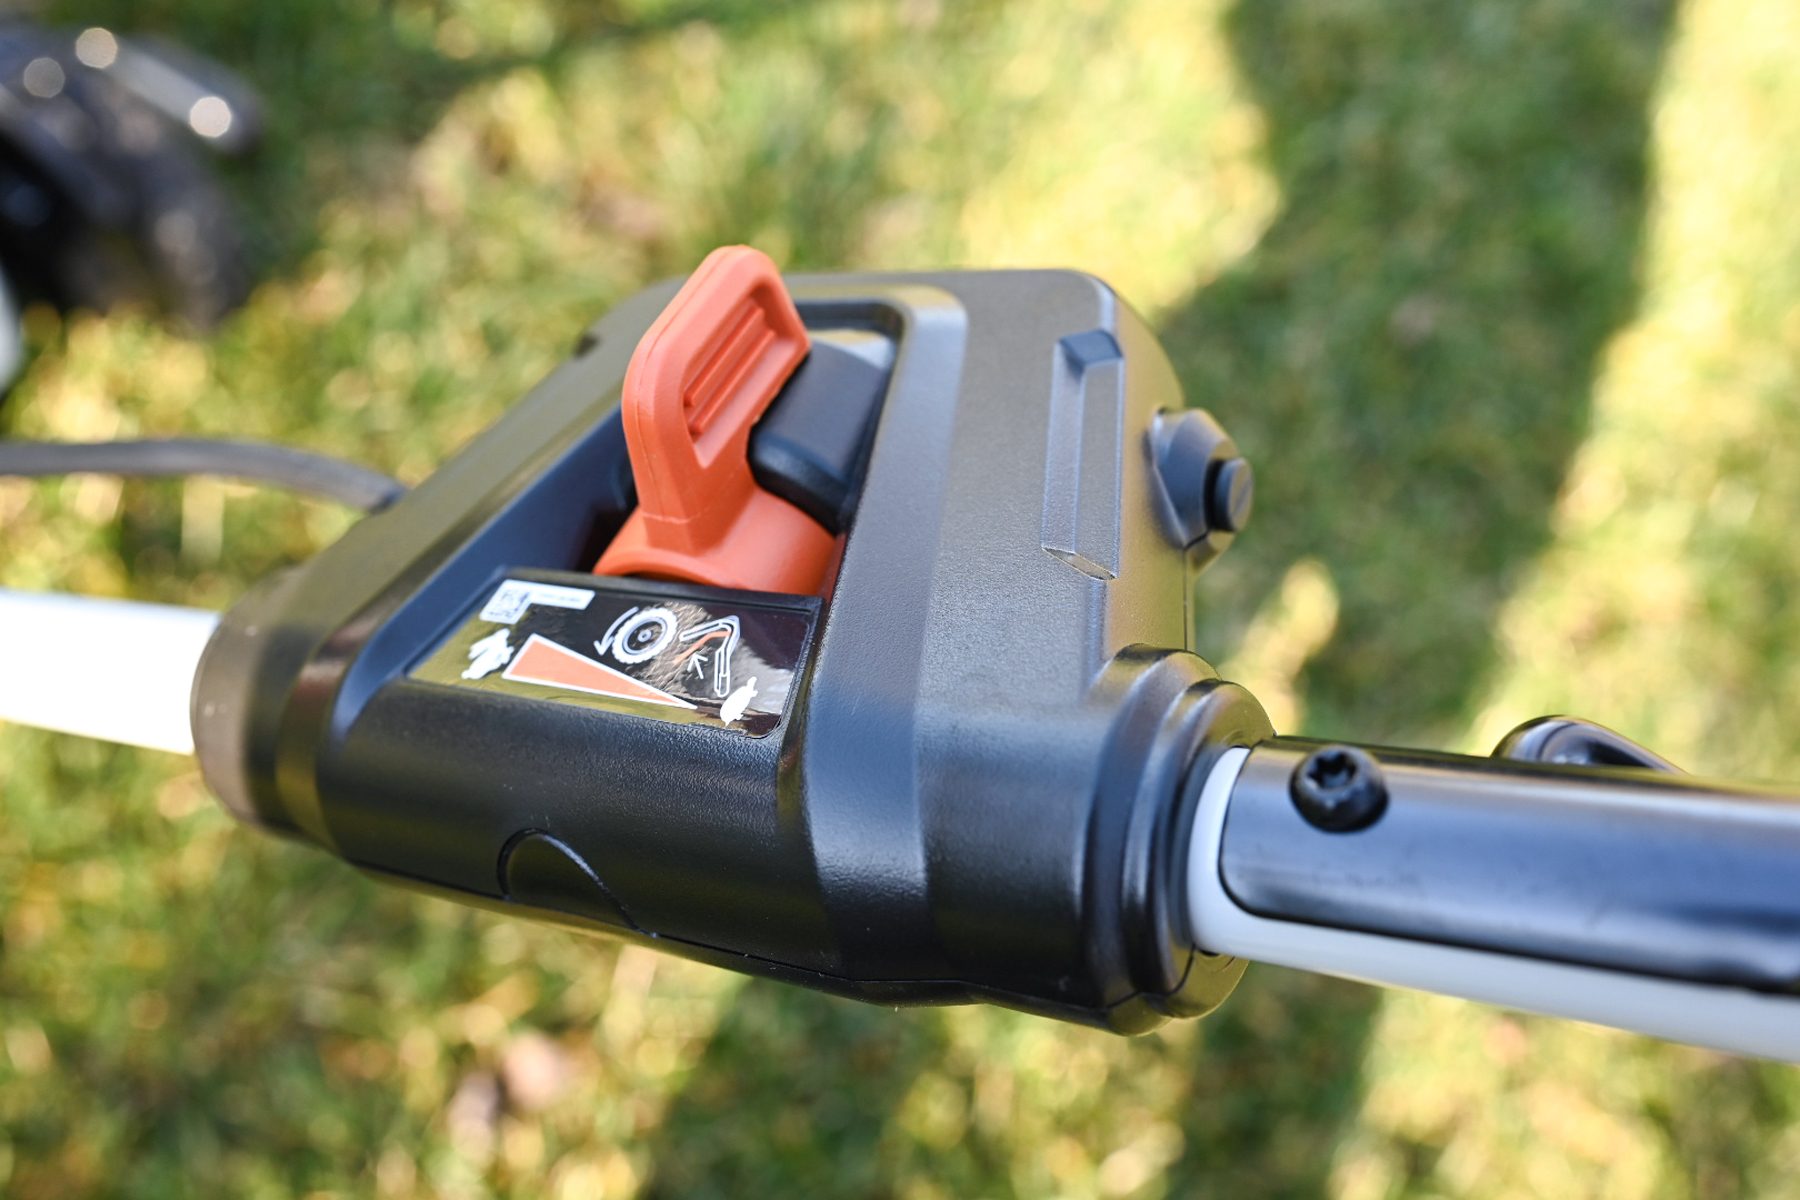 A closeup of a switch on a lawn mower